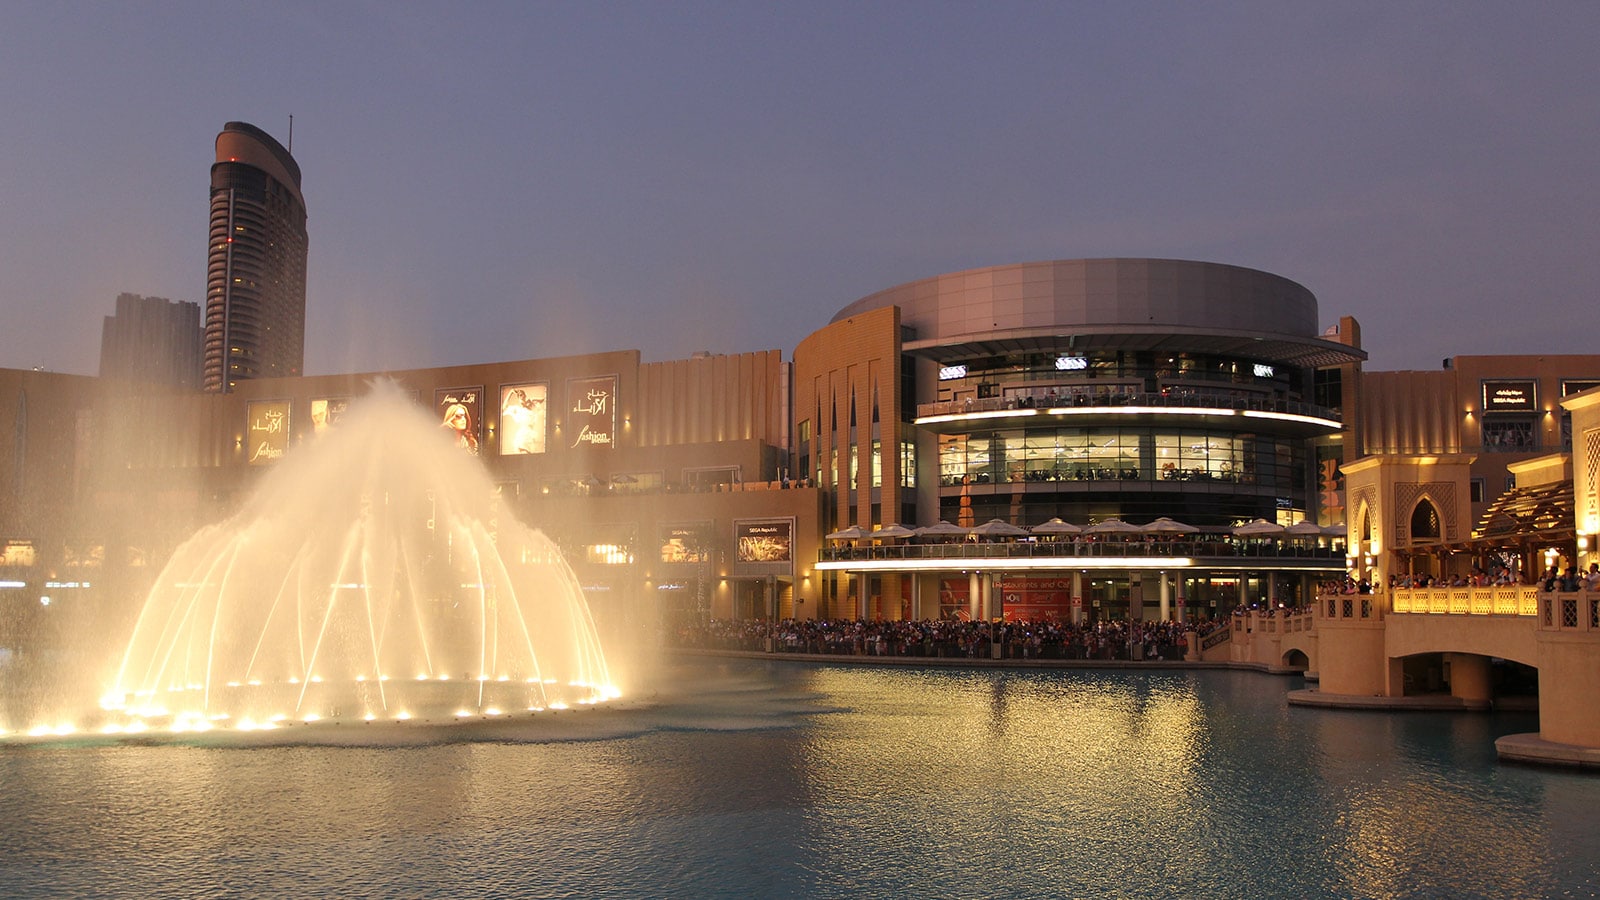 The Dubai Mall Installs More Than 900 Meyer Sound Self-Powered MM-4XP Loudspeakers